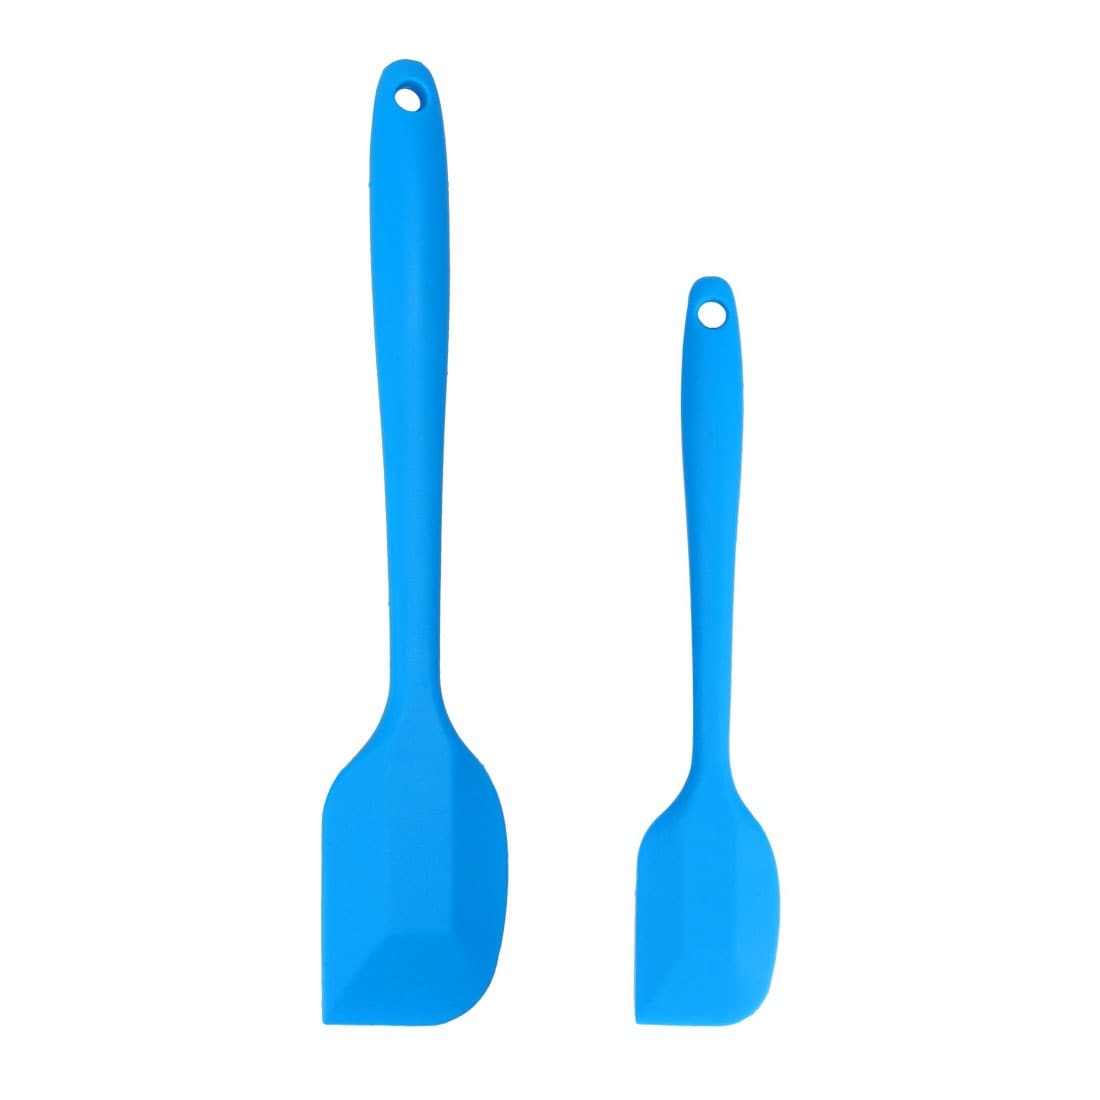 https://ak1.ostkcdn.com/images/products/is/images/direct/0927eb8f234785407317e67849ea953a12260d55/Silicone-Non-Stick-Spatula-Set-2-Pcs-Heat-Resistant-Turner.jpg